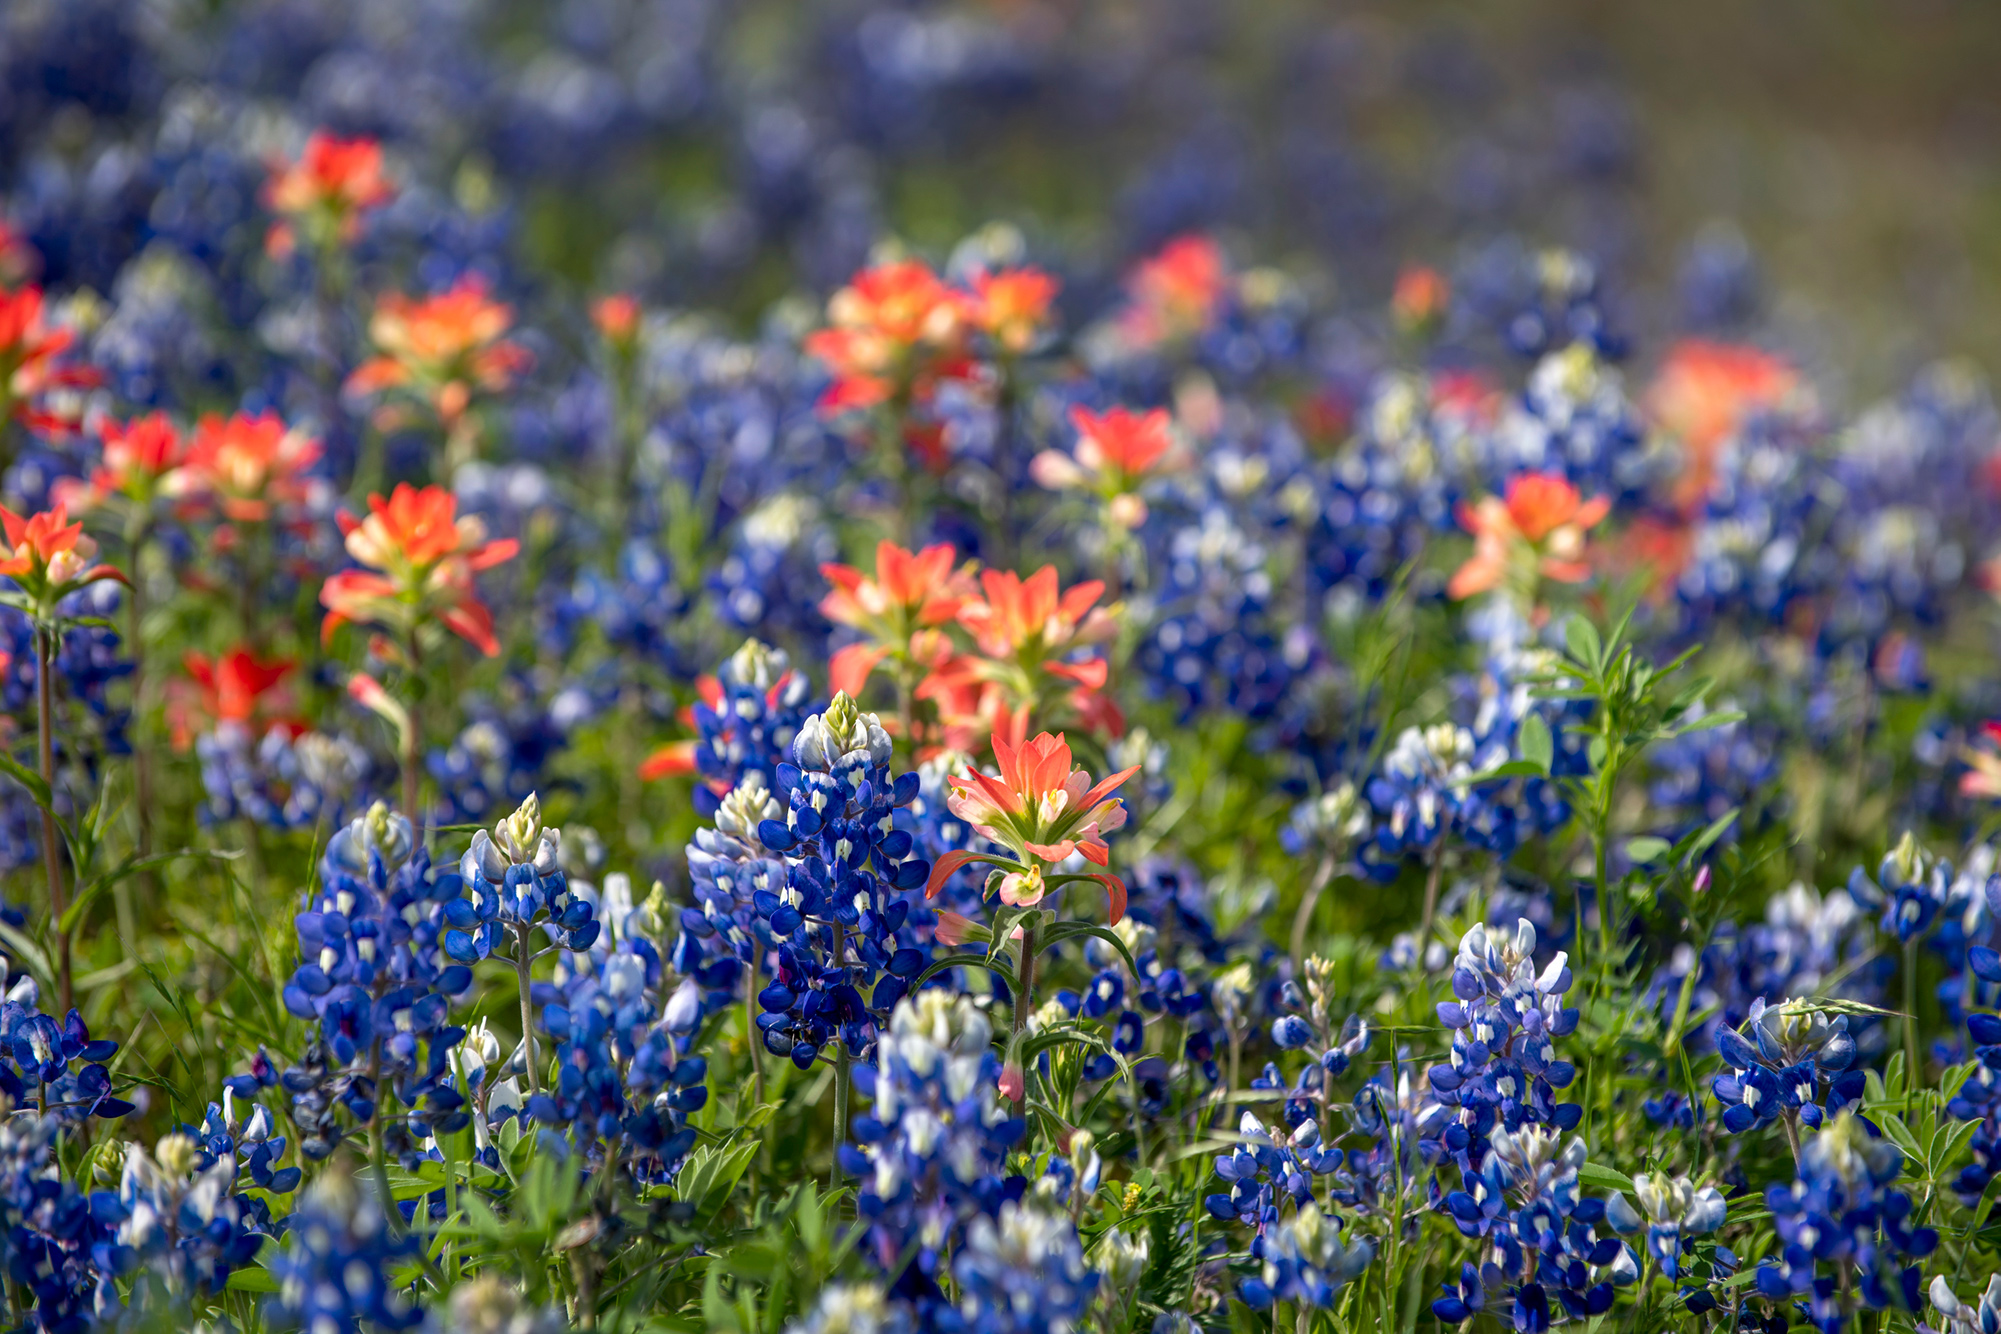 A close-up photograph of bluebonnets and orange flowers in a field in Ellis County near Ennis